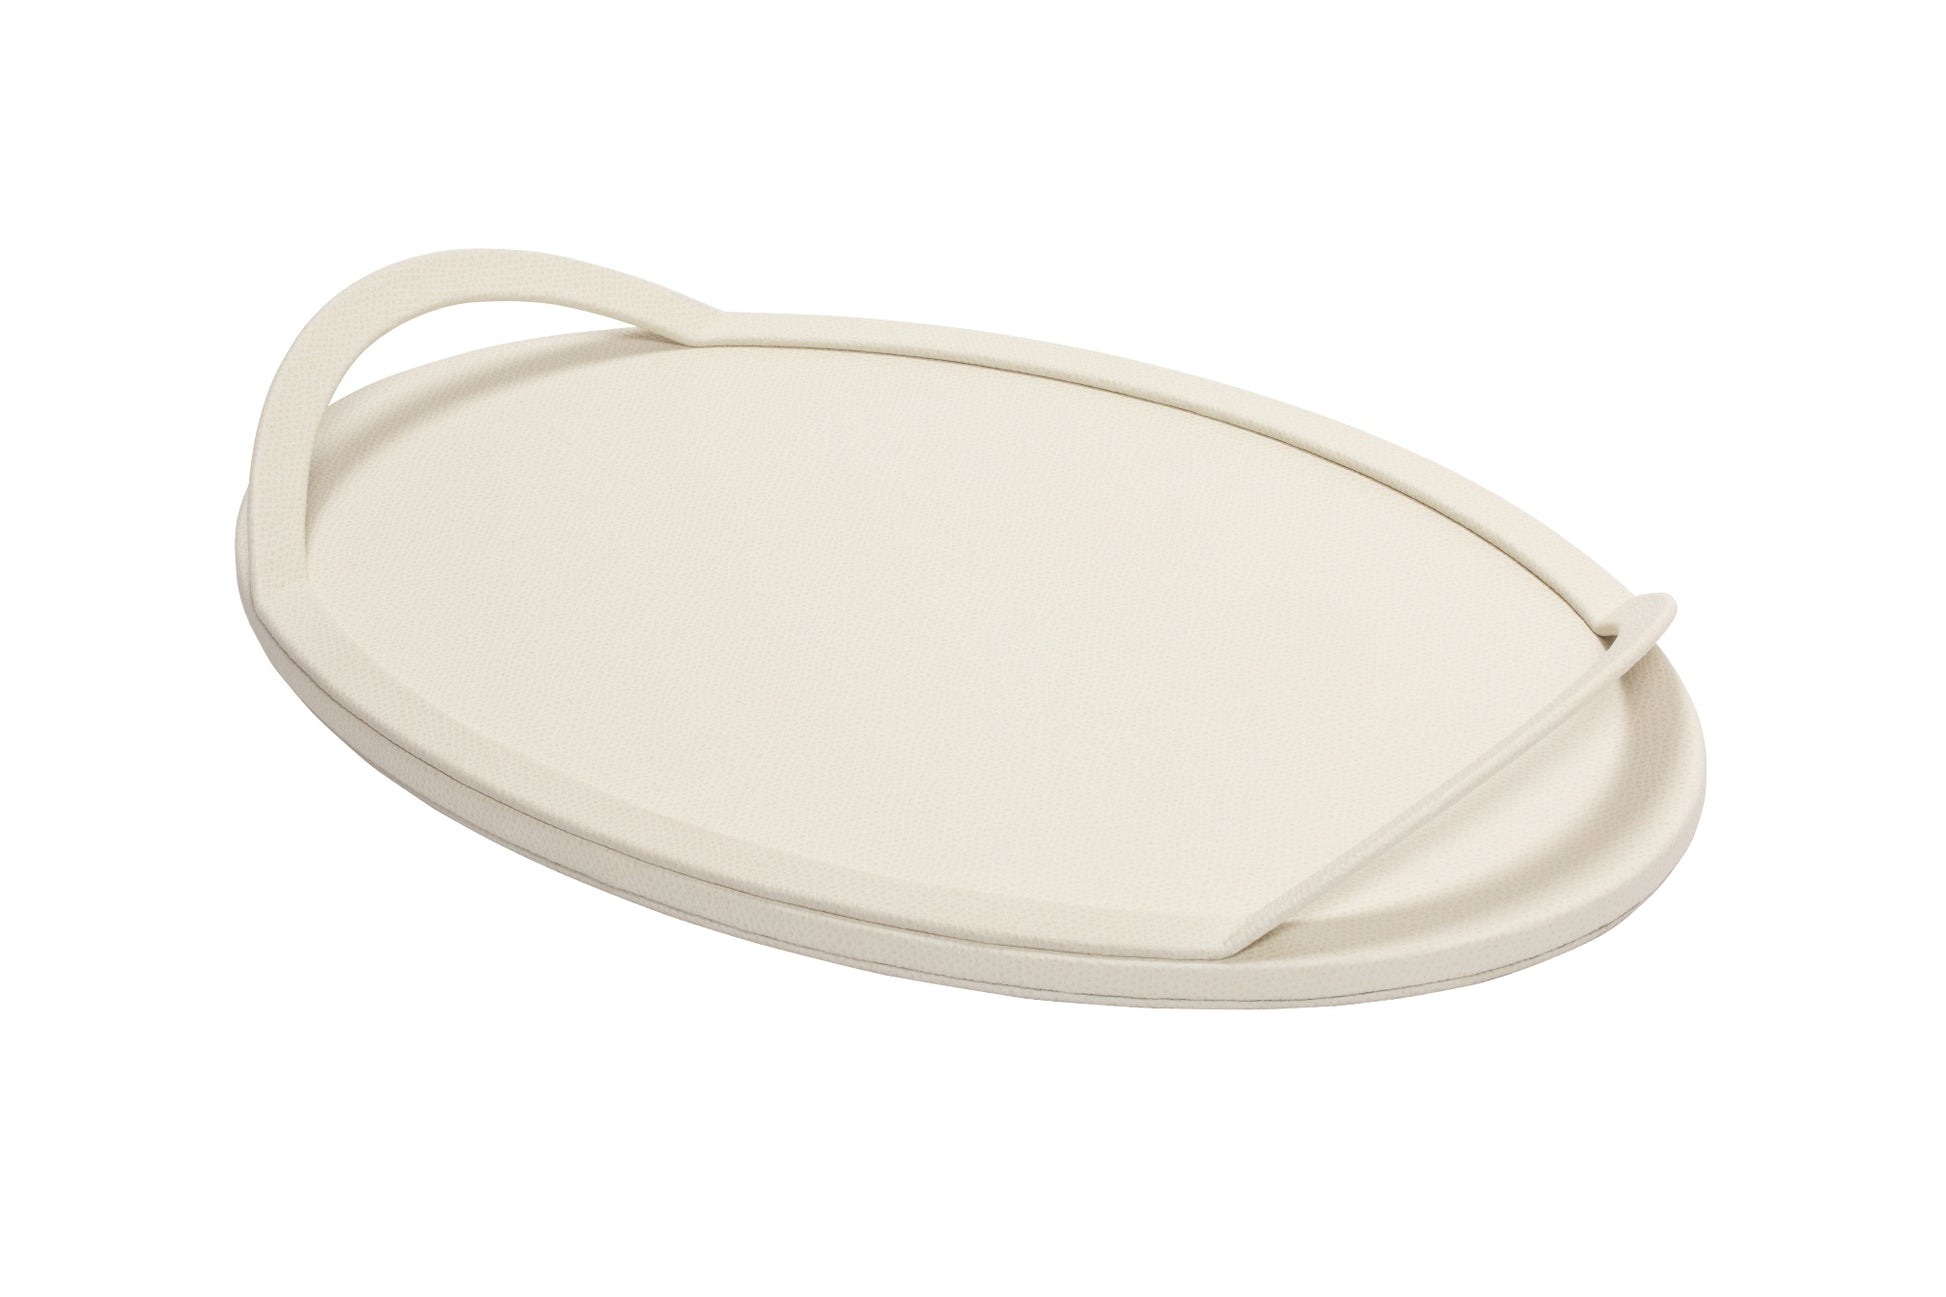 Giobagnara x Piet Boon Form Tray Oval | Leather-Covered Rigid Metal Structure | Stylish and Functional Round Tray | Explore a Range of Luxury Home Decor at 2Jour Concierge, #1 luxury high-end gift & lifestyle shop